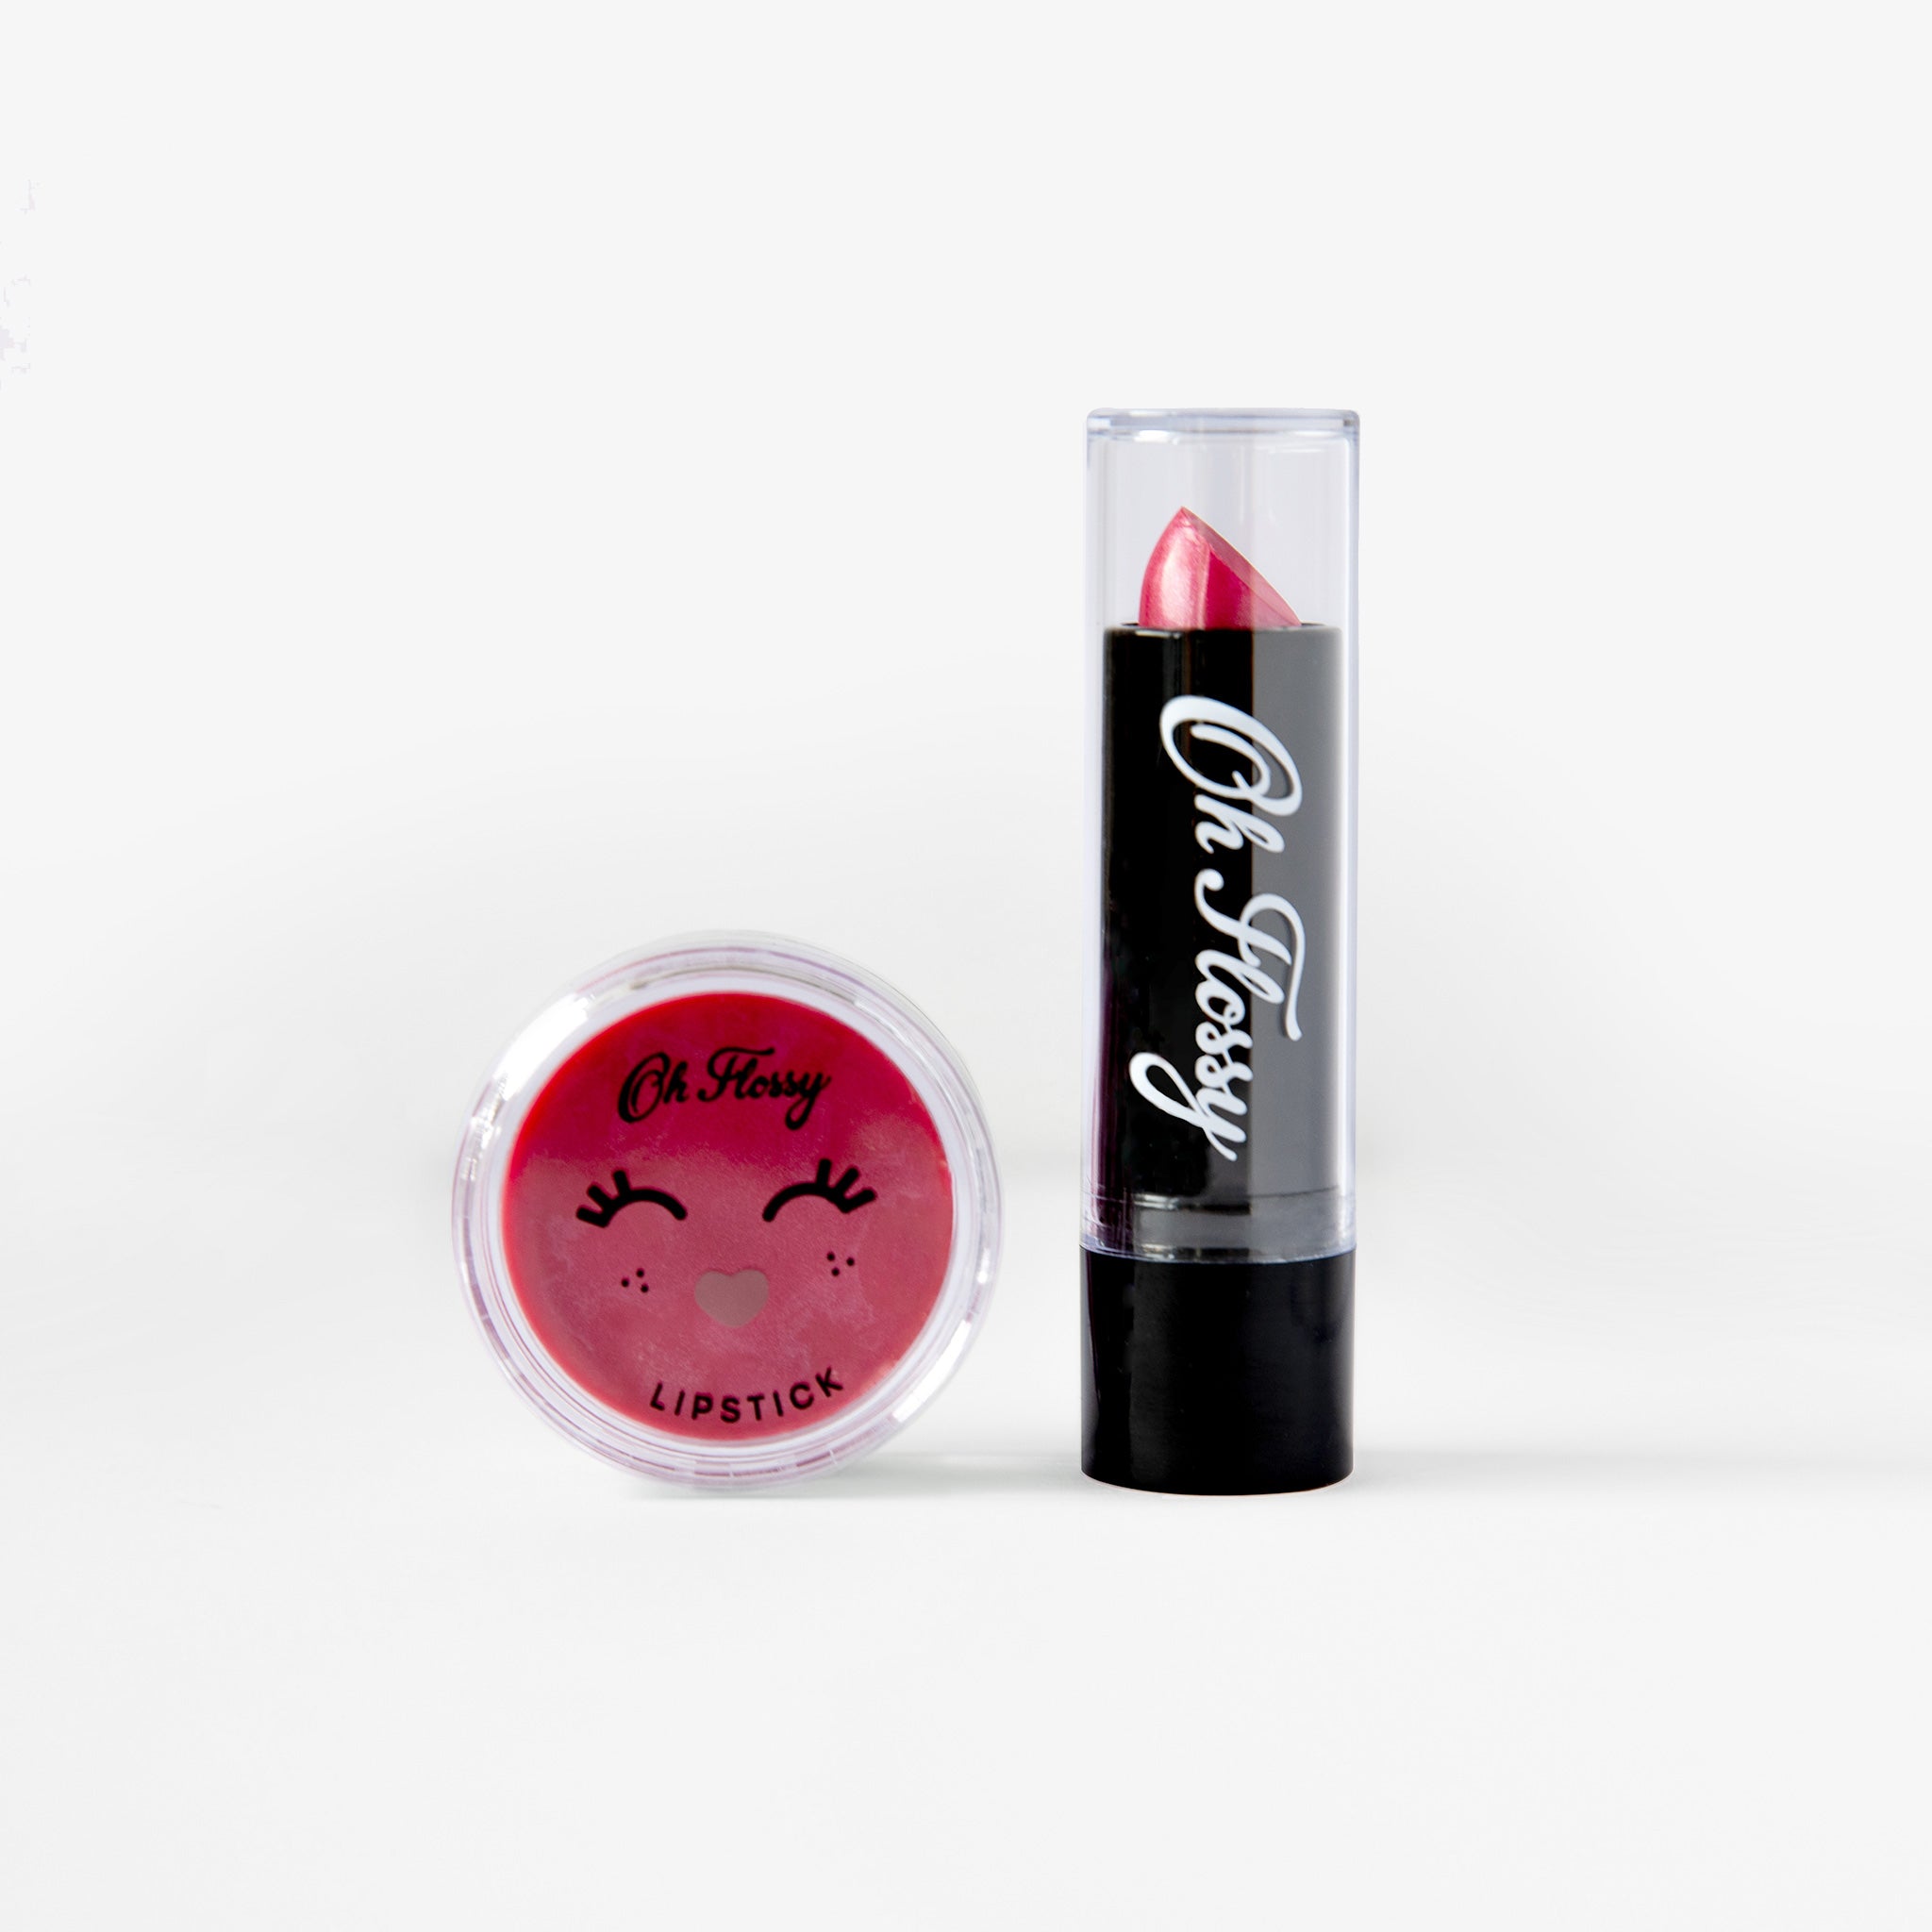 Oh-Flossy-Natural-Kids-Makeup-Lipstick-in-pod-and-in-stick